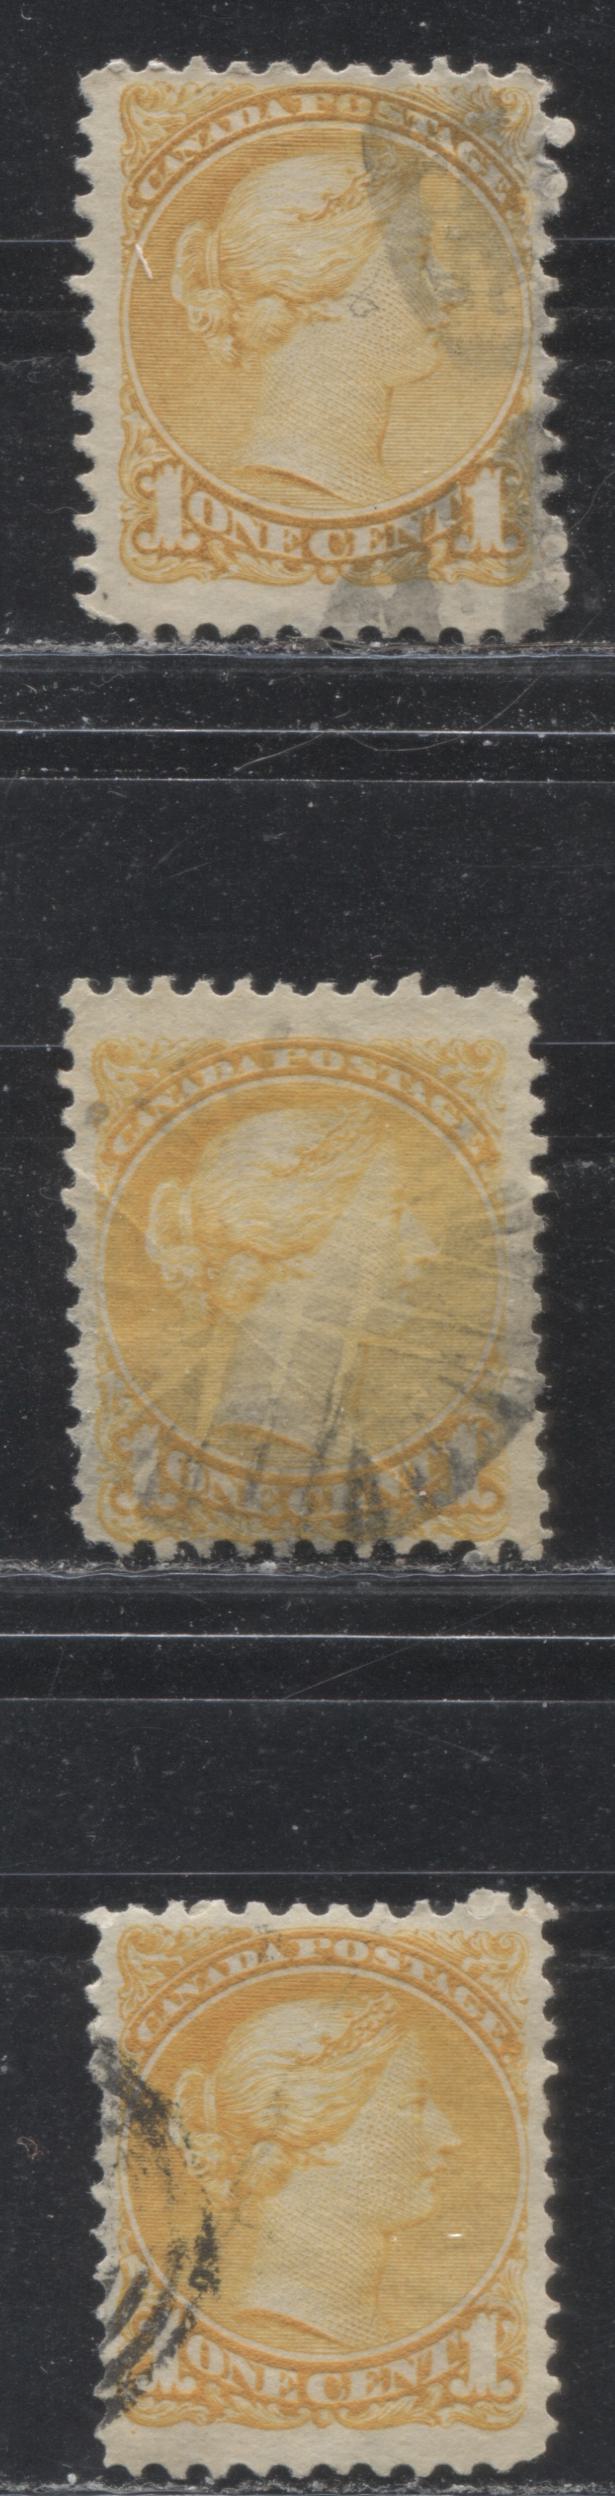 Lot 150 Canada #35iii,vii 1c Yellow, Bright Yellow & Lemon Yellow Queen Victoria, 1870-1897 Small Queen Issue, Three Fine Used Singles On Horizontal Wove Paper, Perfs 11.7 x 11.8, 11.6 x 12 & 11.6 x 11.95